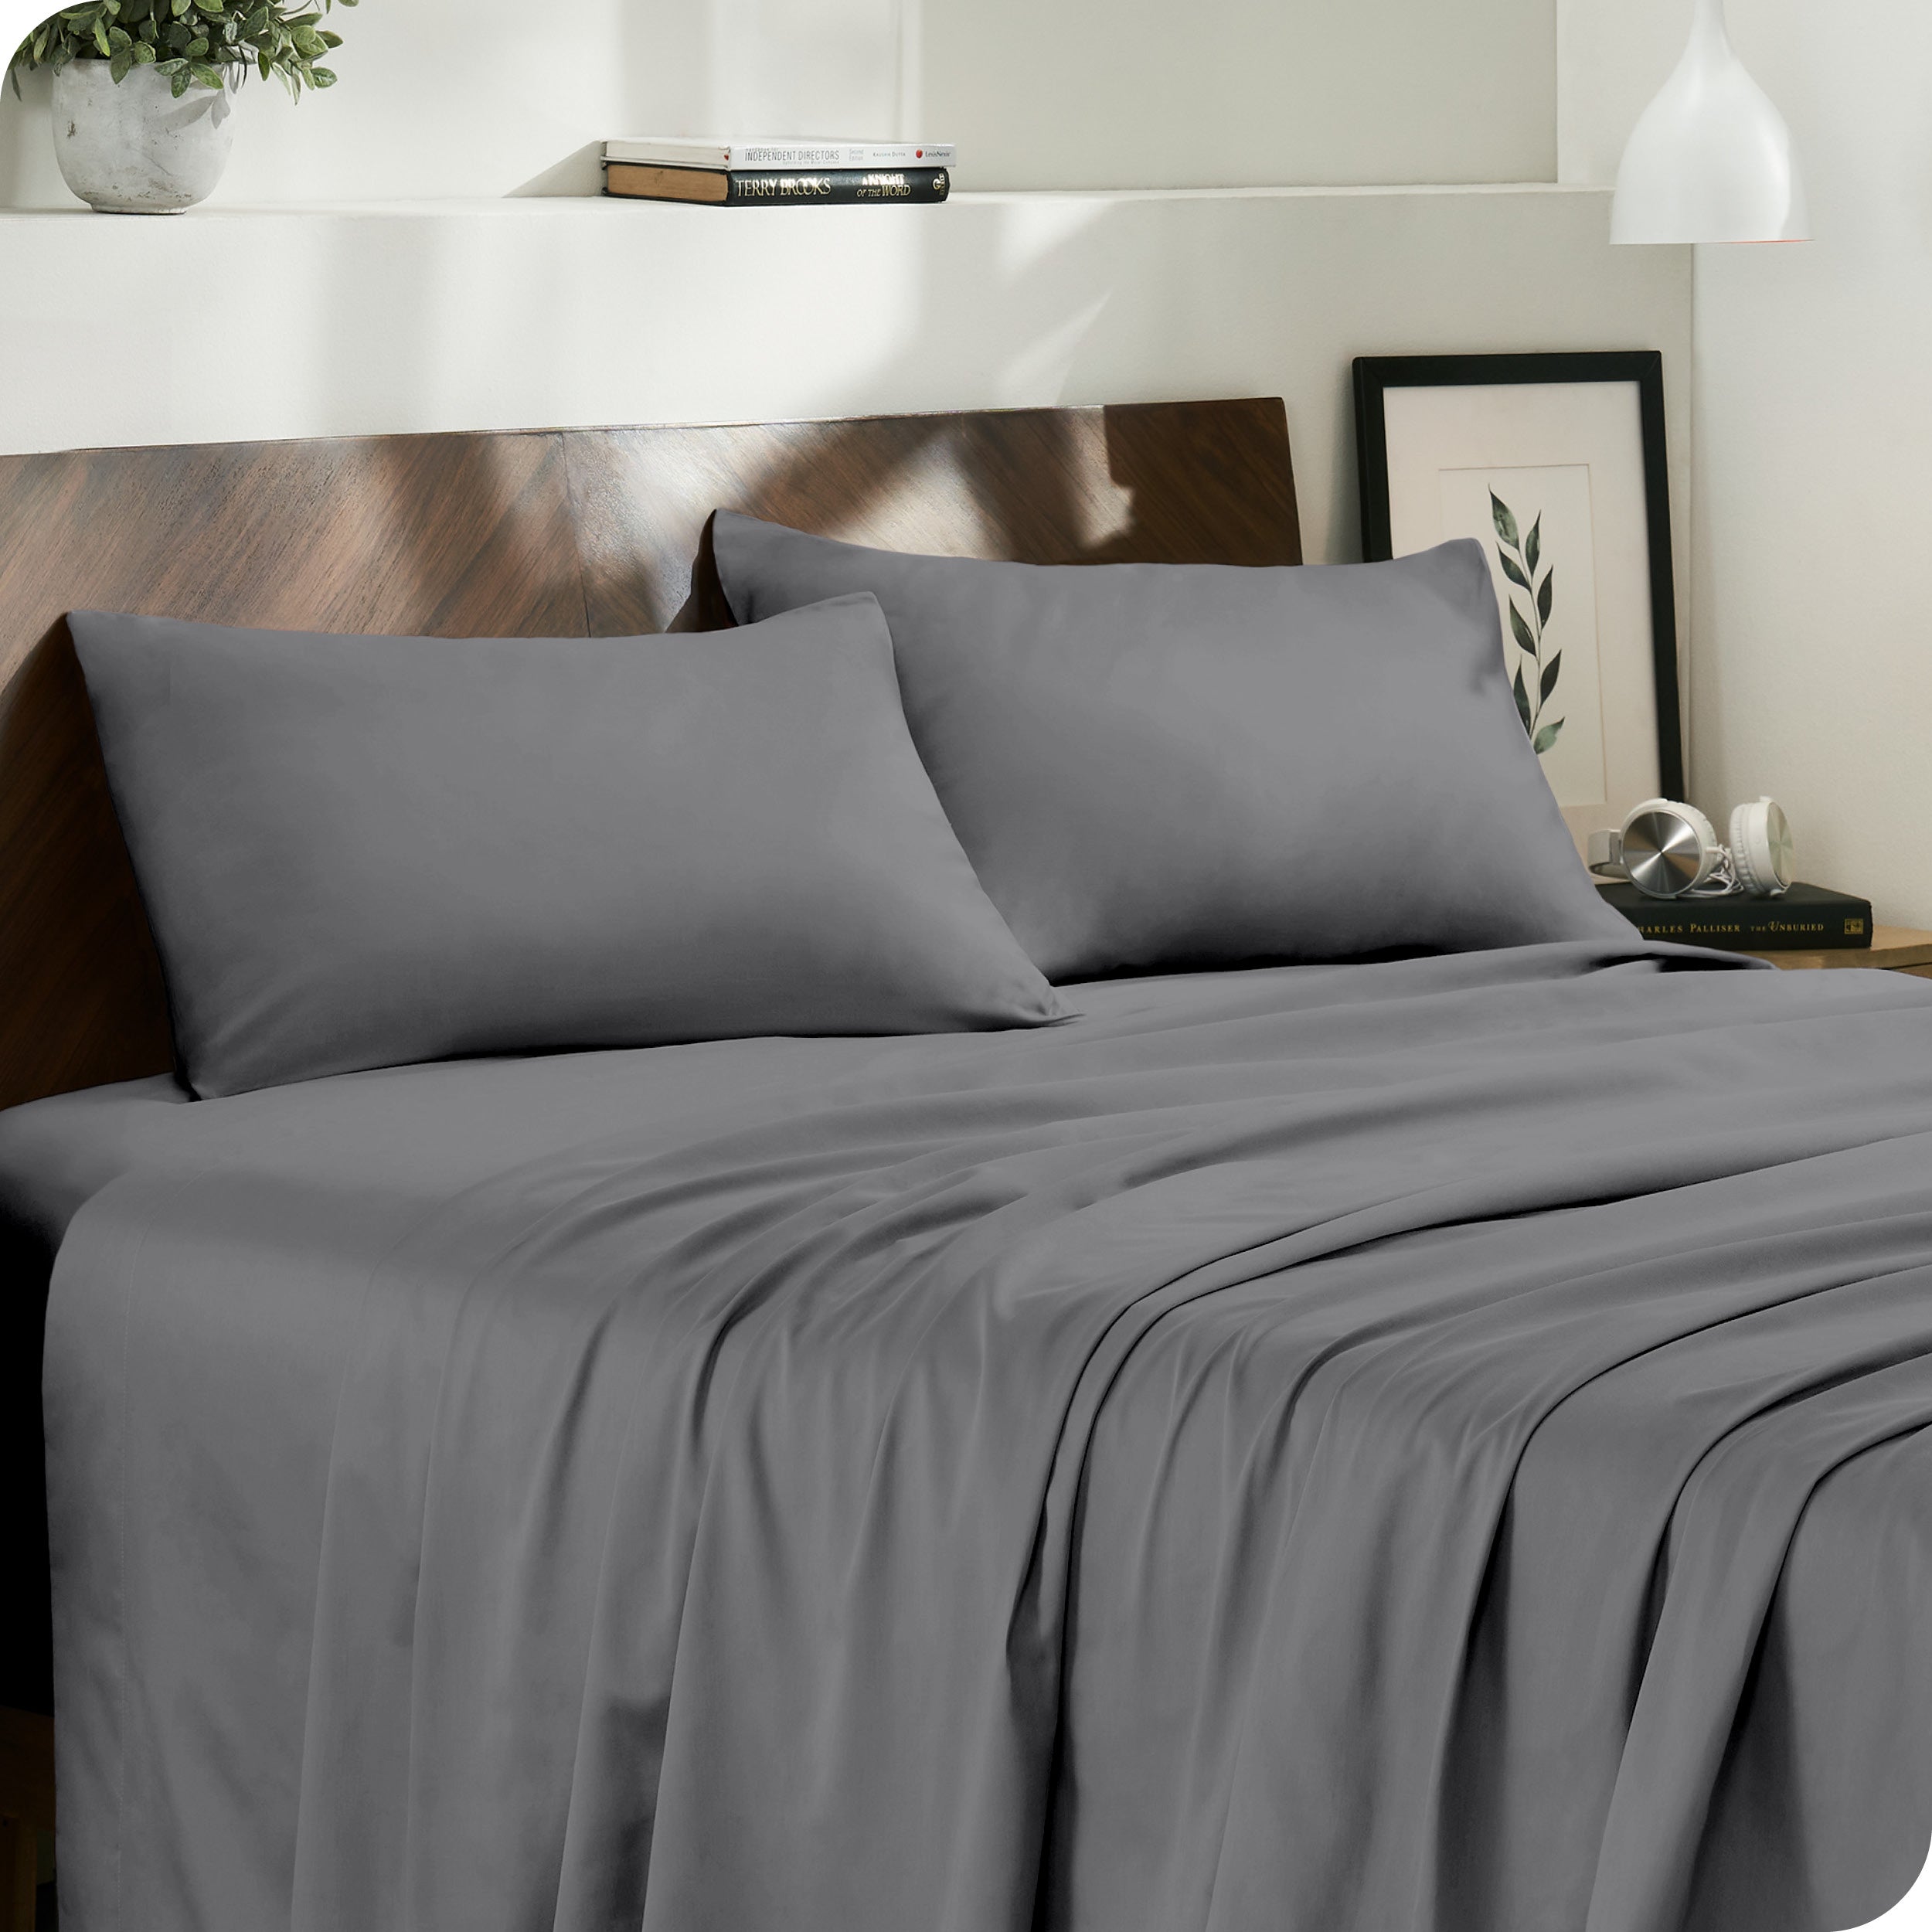 Diagonal view of modern bedroom with sateen sheets and pillowcases on the bed